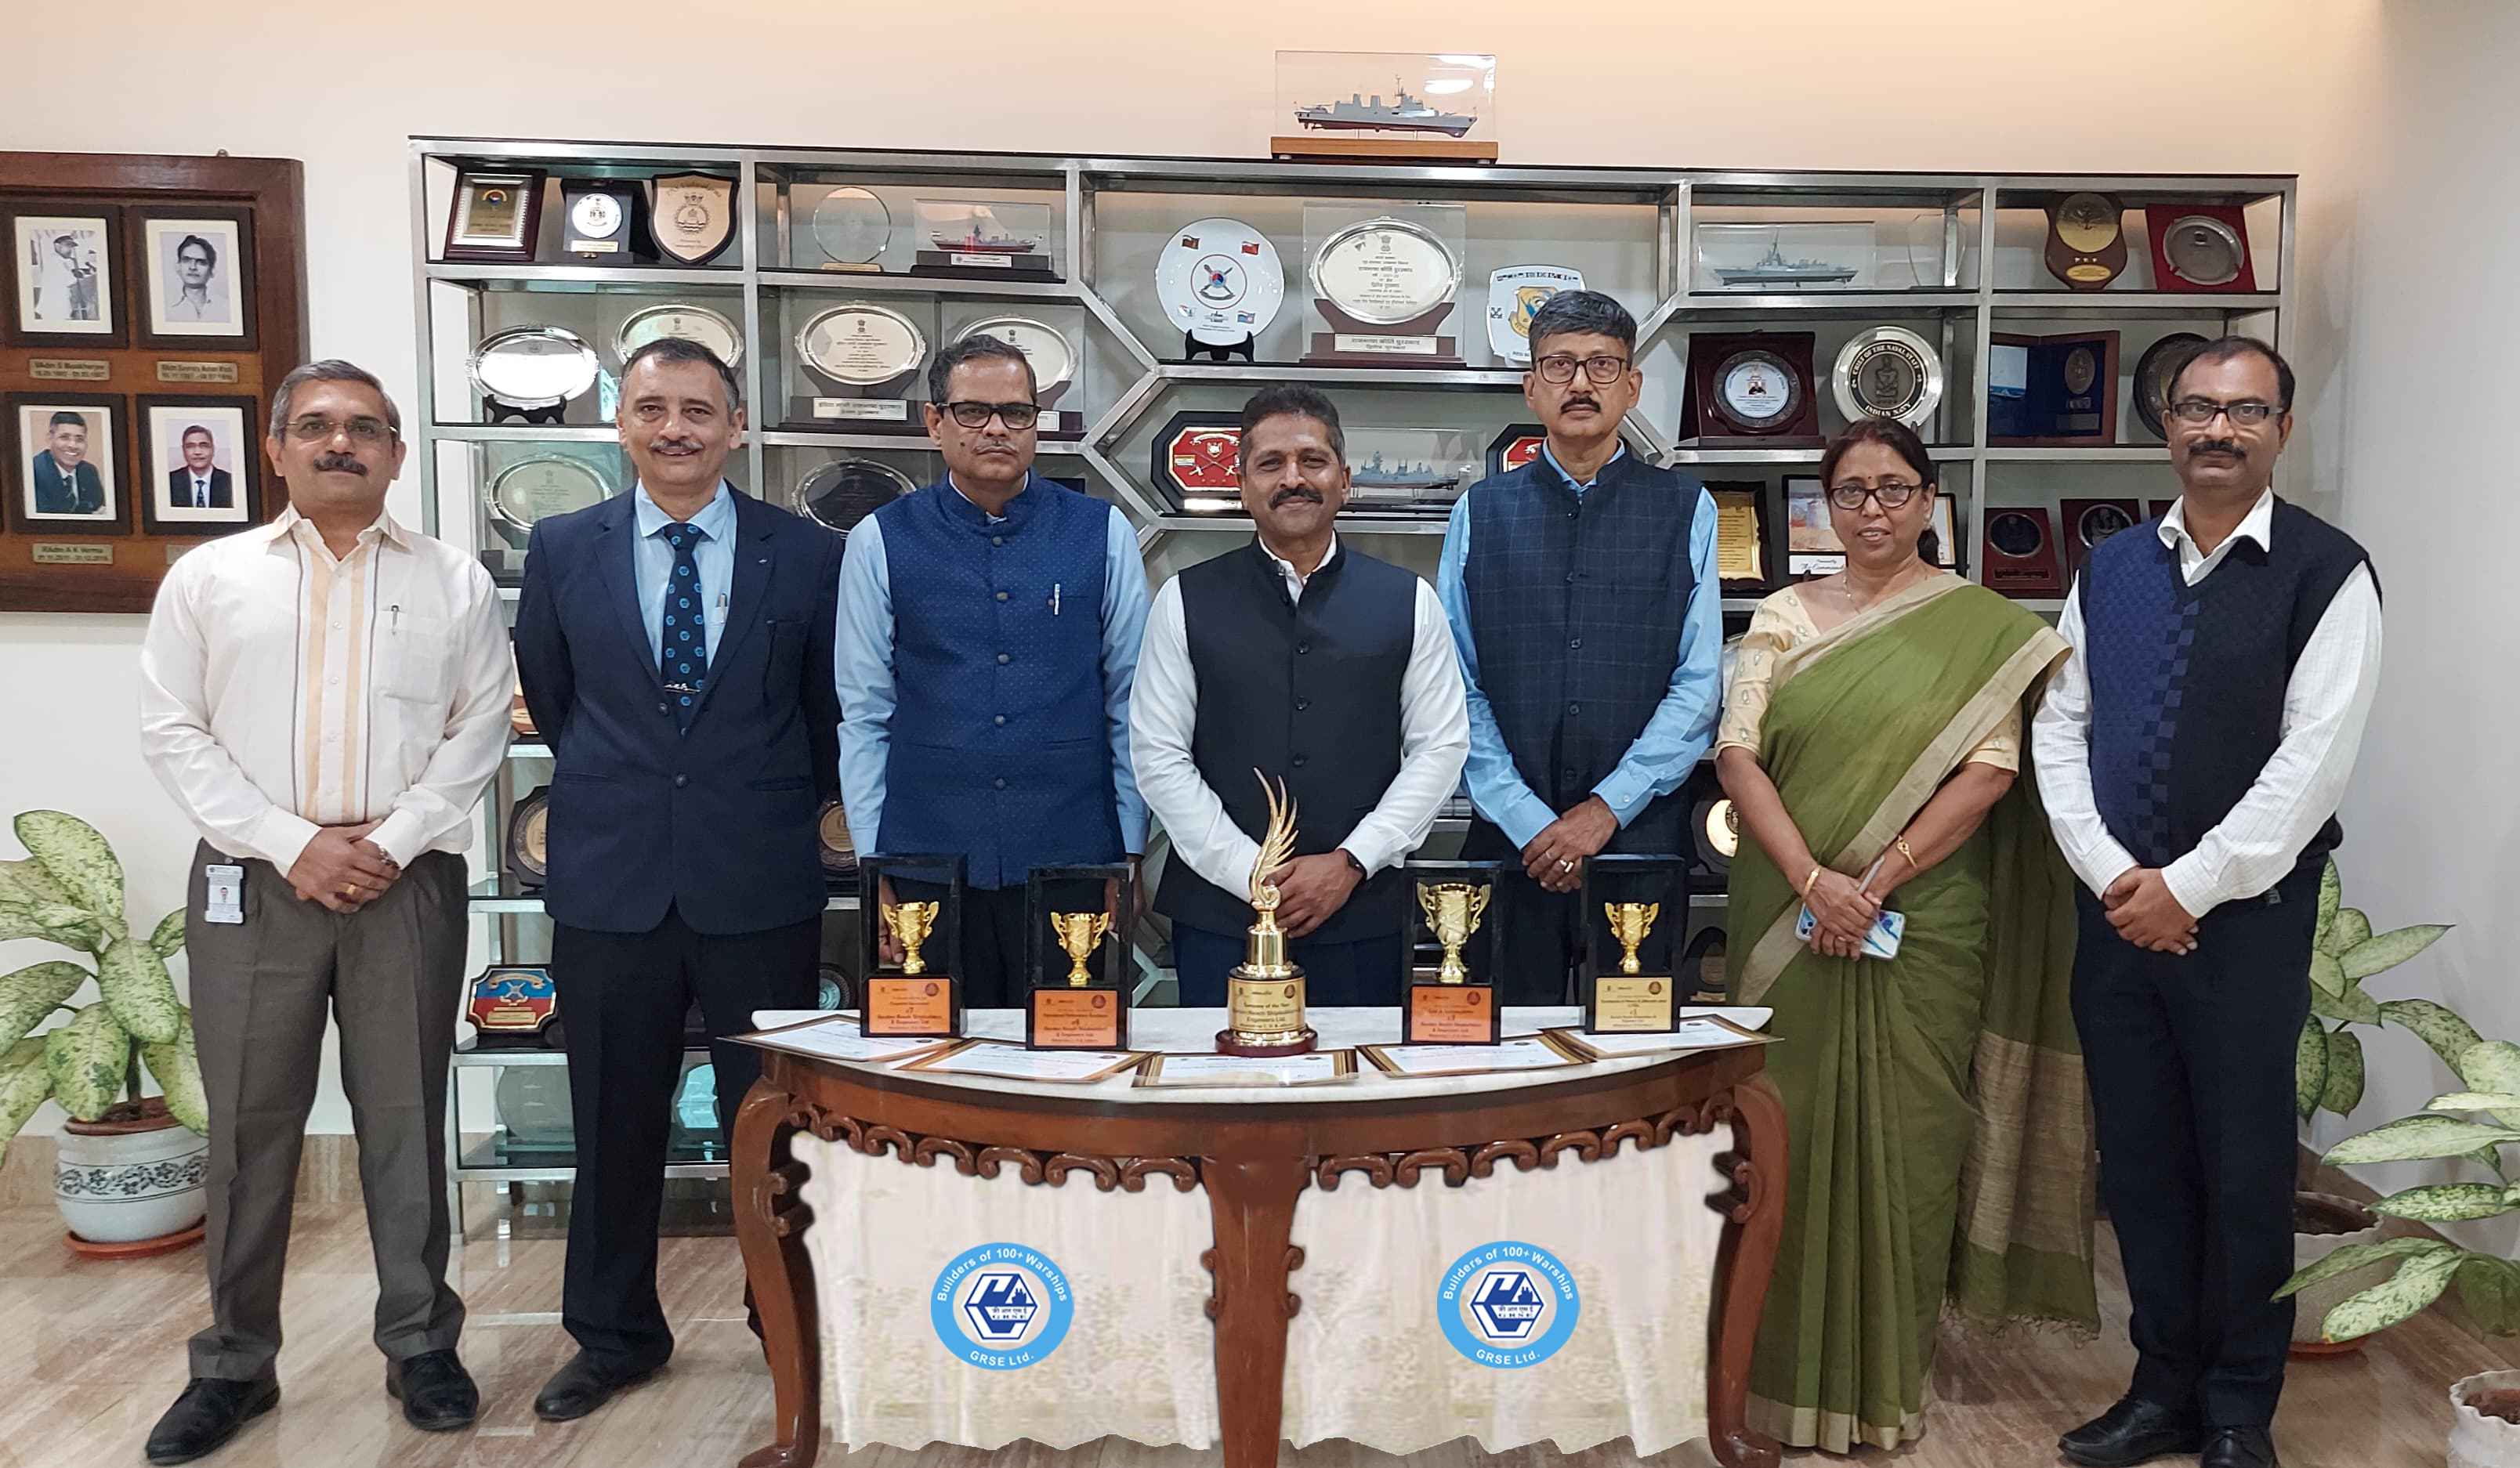 Image 1 - GRSE bags 5 awards including 